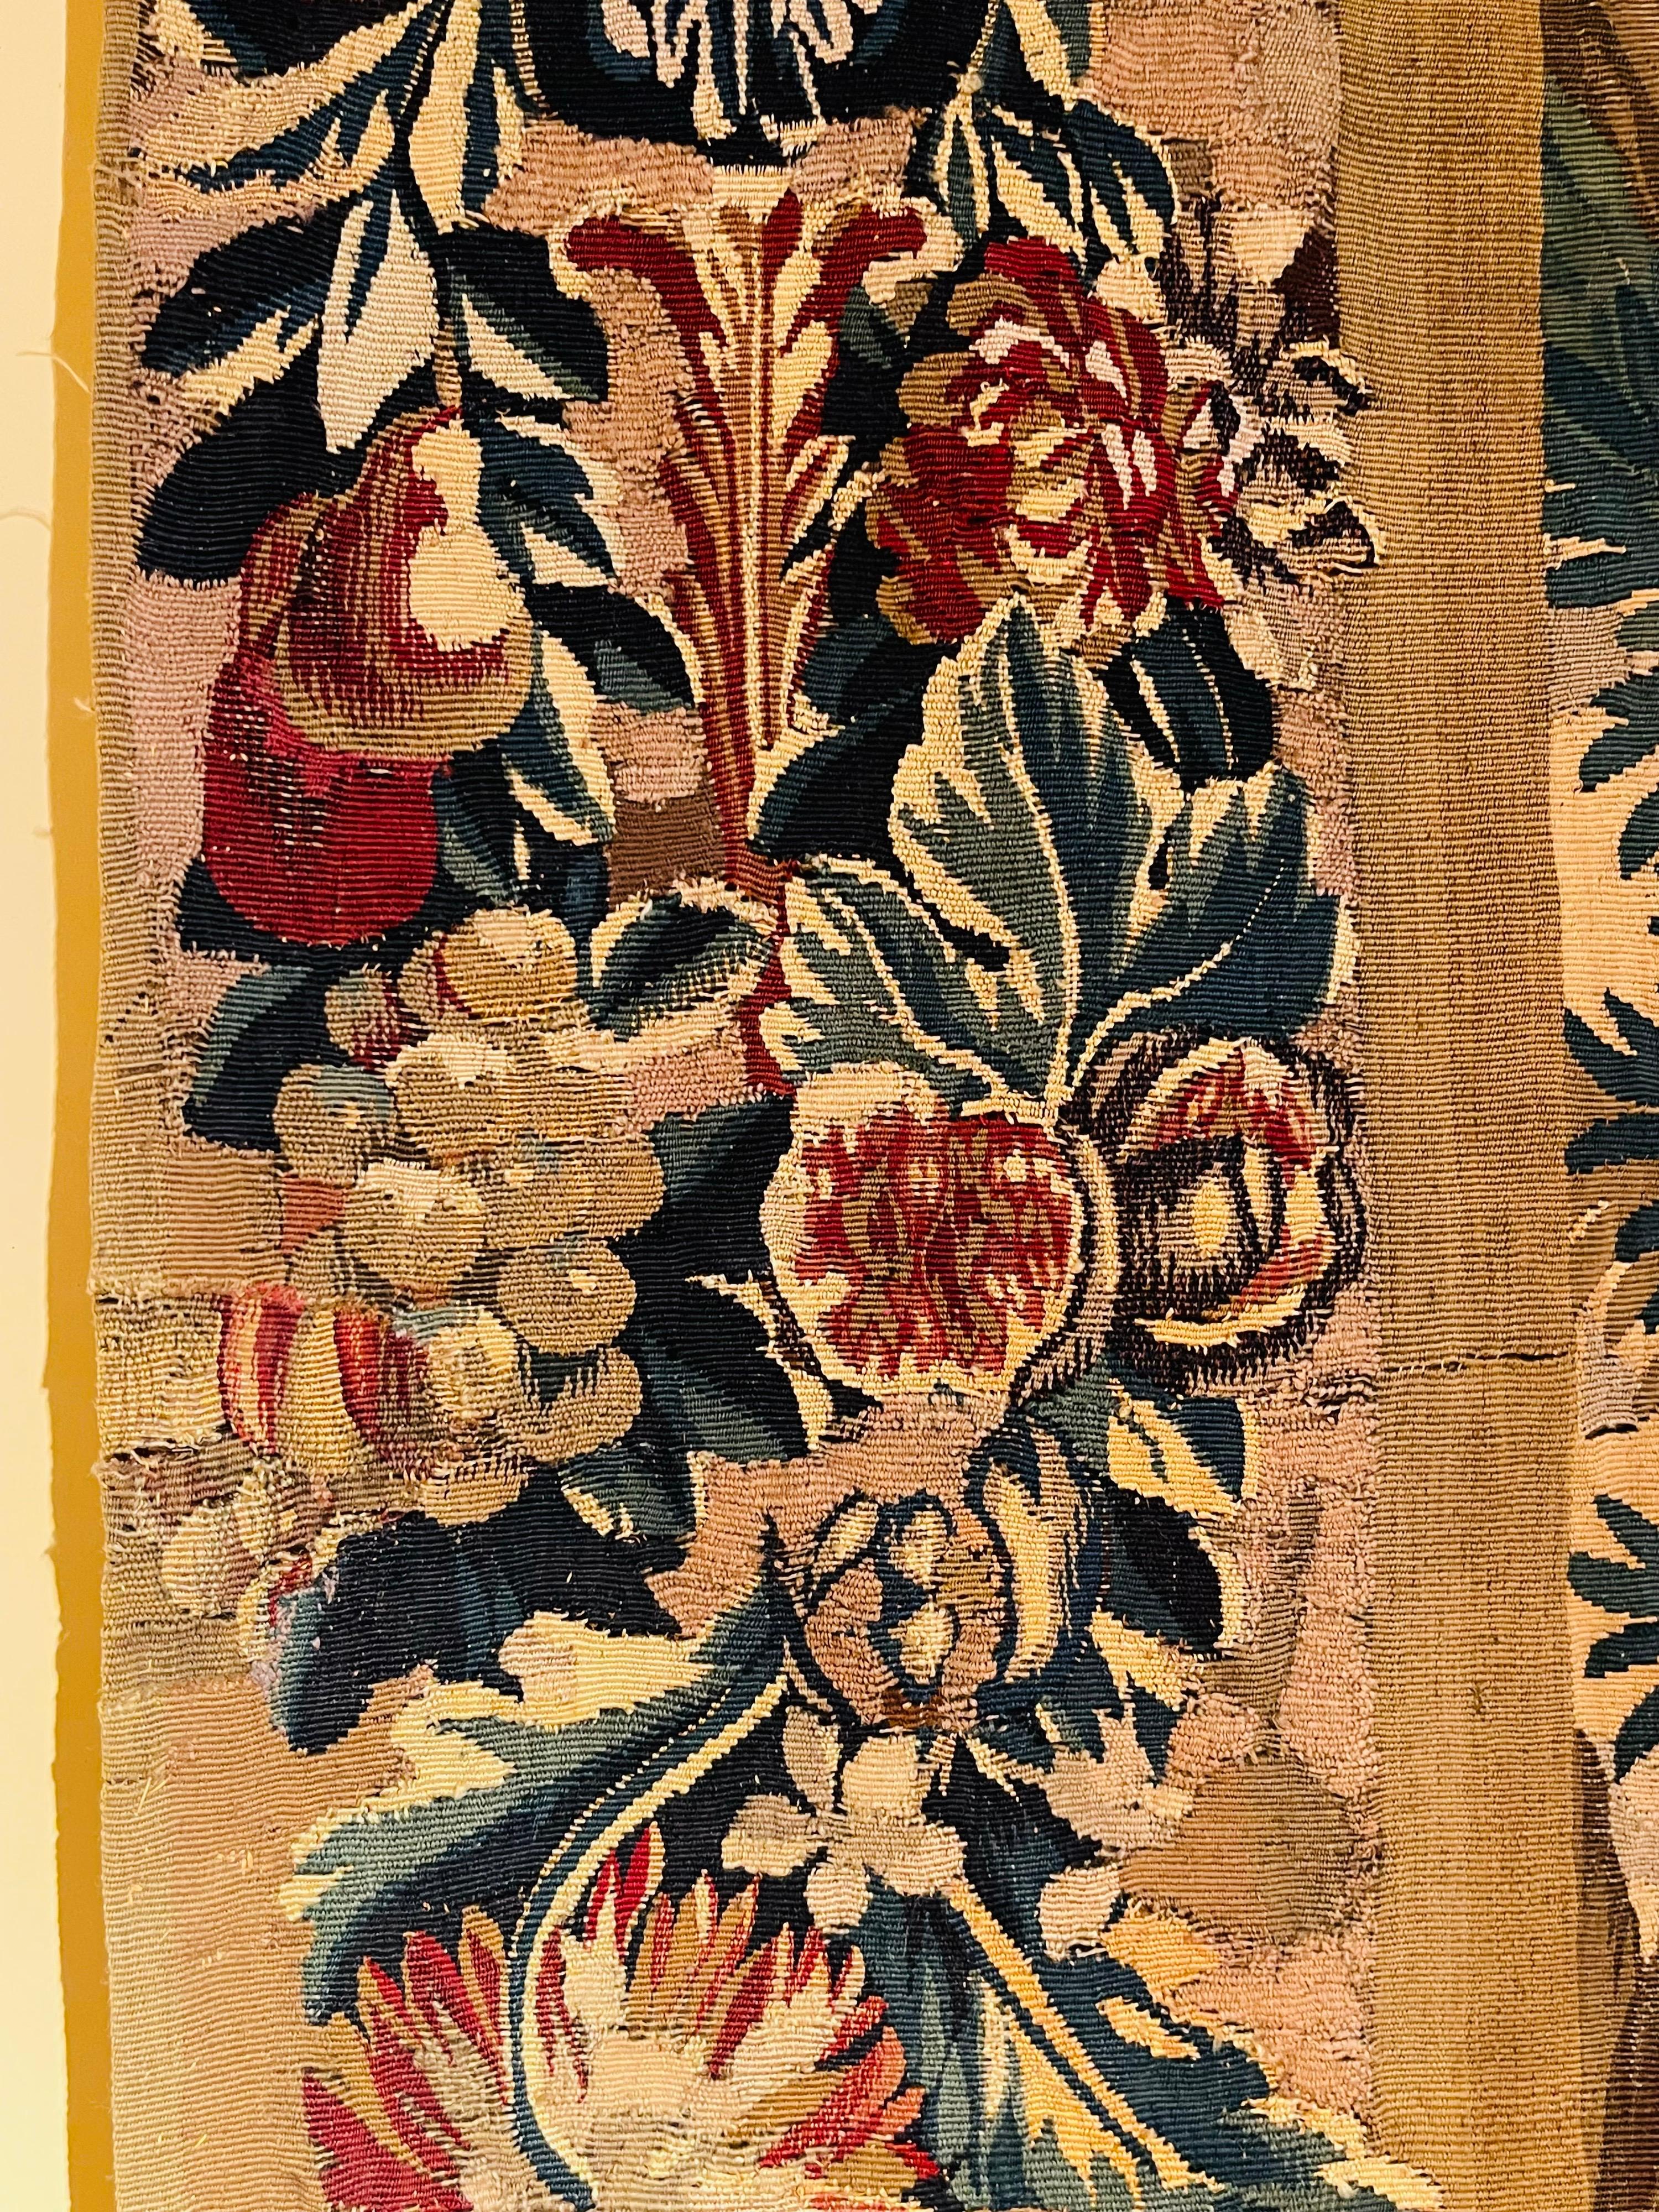 Museum Gobelein / Tapestry 18th Century, Brussels 7